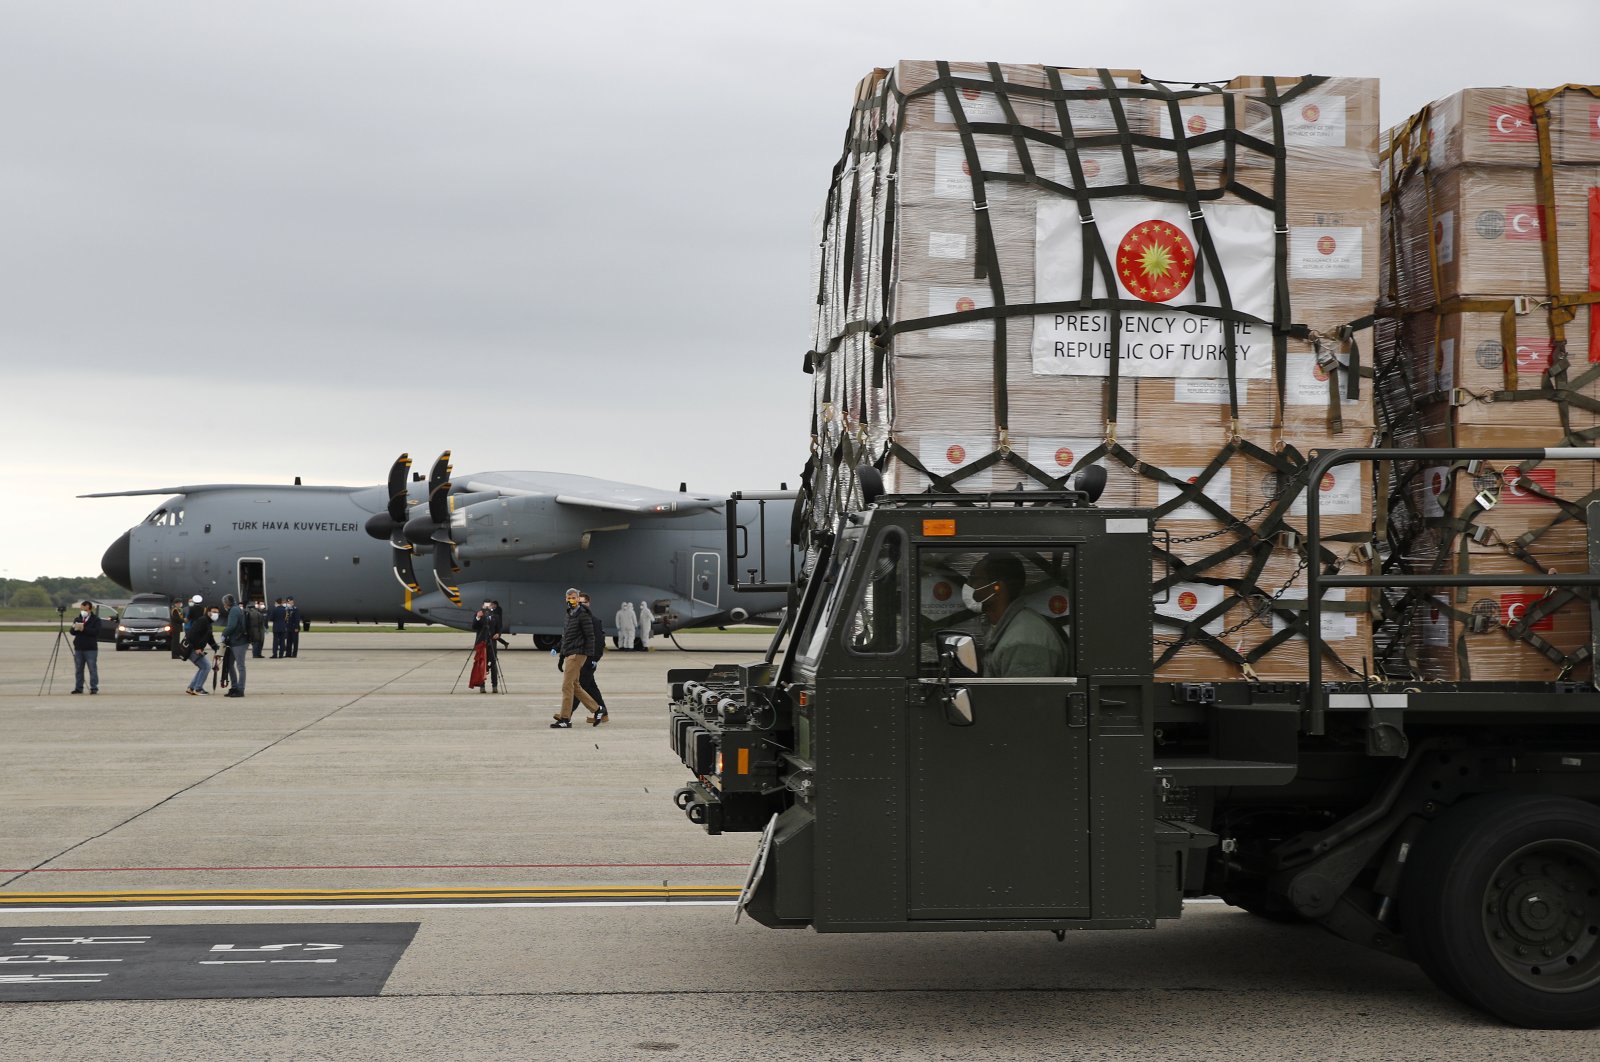 A U.S. Air Force vehicle carries a donation of medical supplies from Turkey after it was unloaded from a military plane, at Andrews Air Force Base, Maryland, April 28, 2020. (AP Photo)